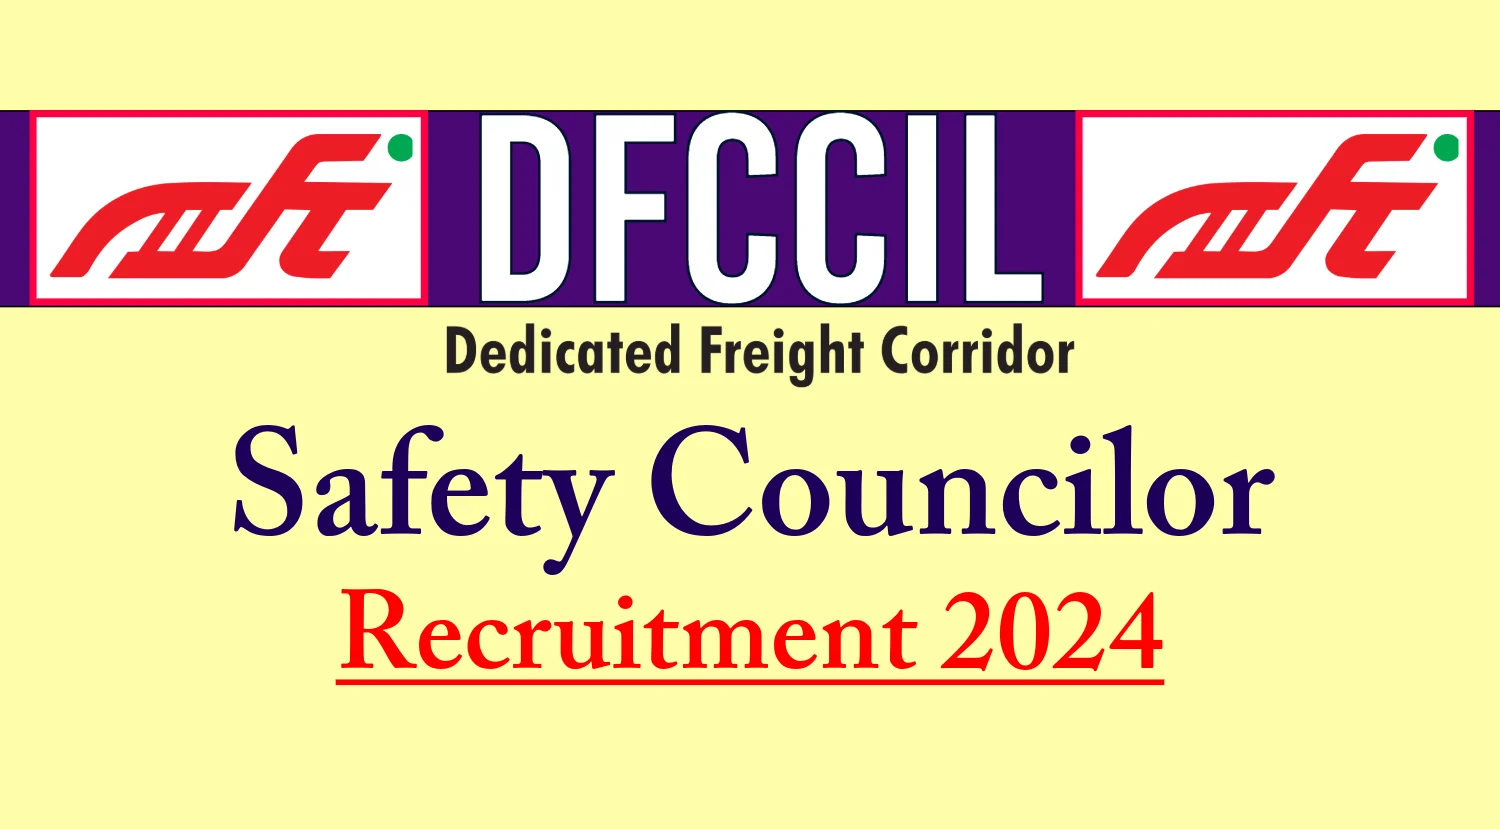 DFCCIL Safety Counselor Recruitment